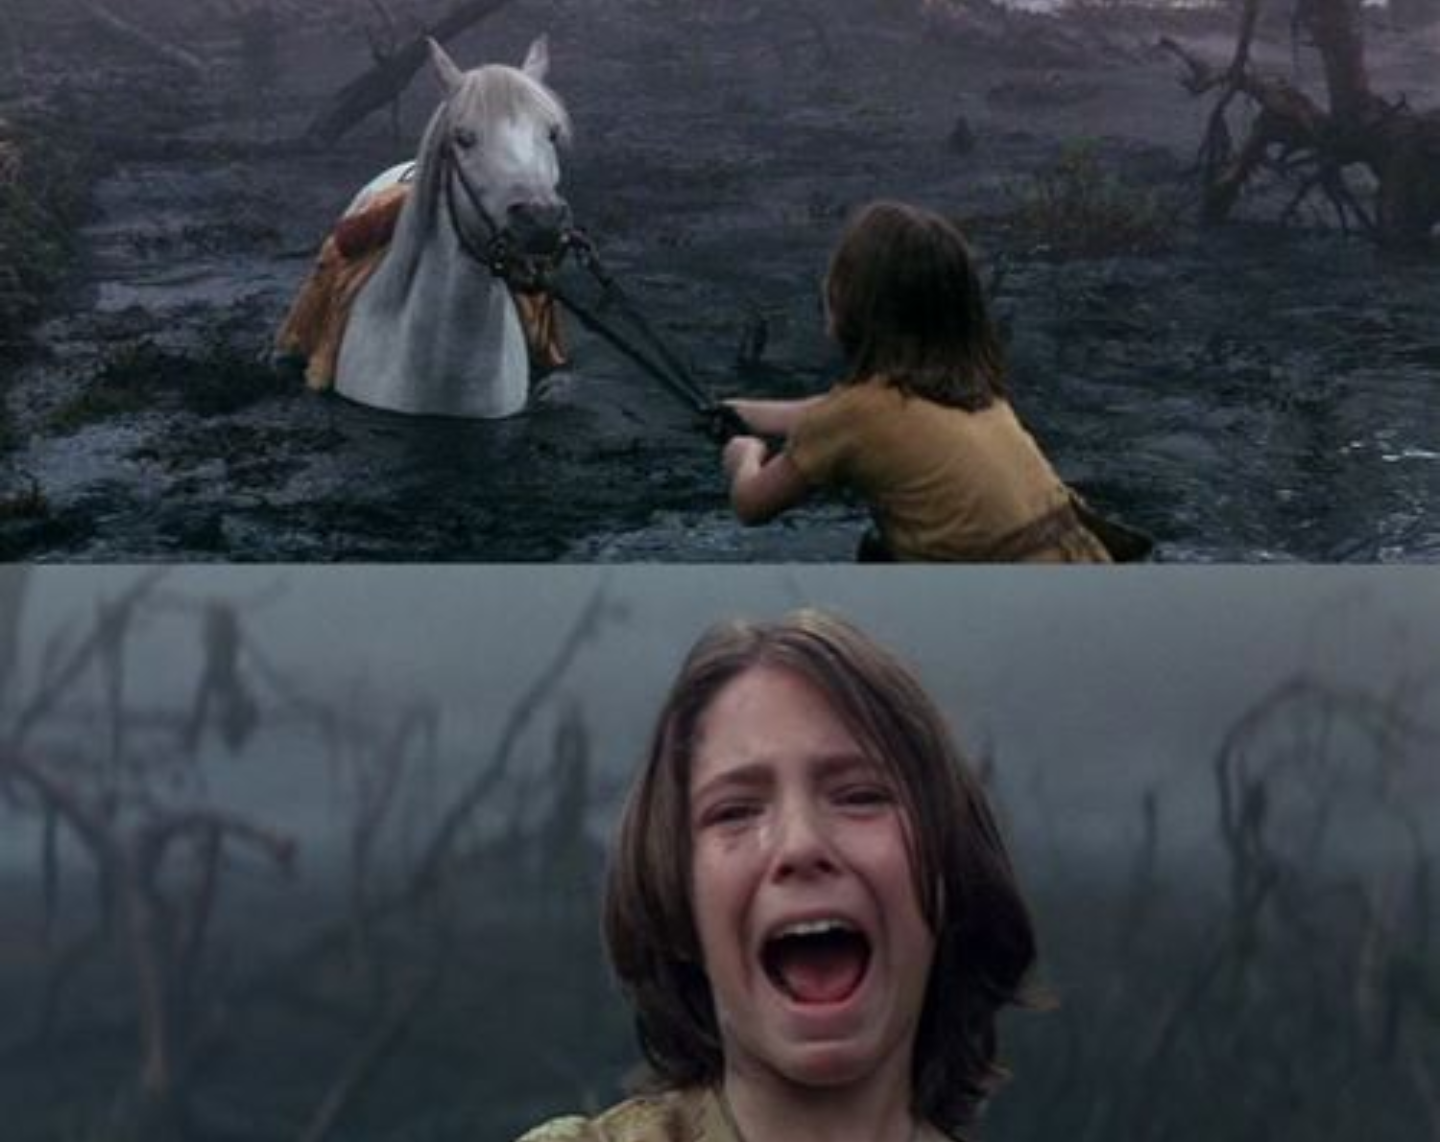 atreyu crying trying to save artax from drowning